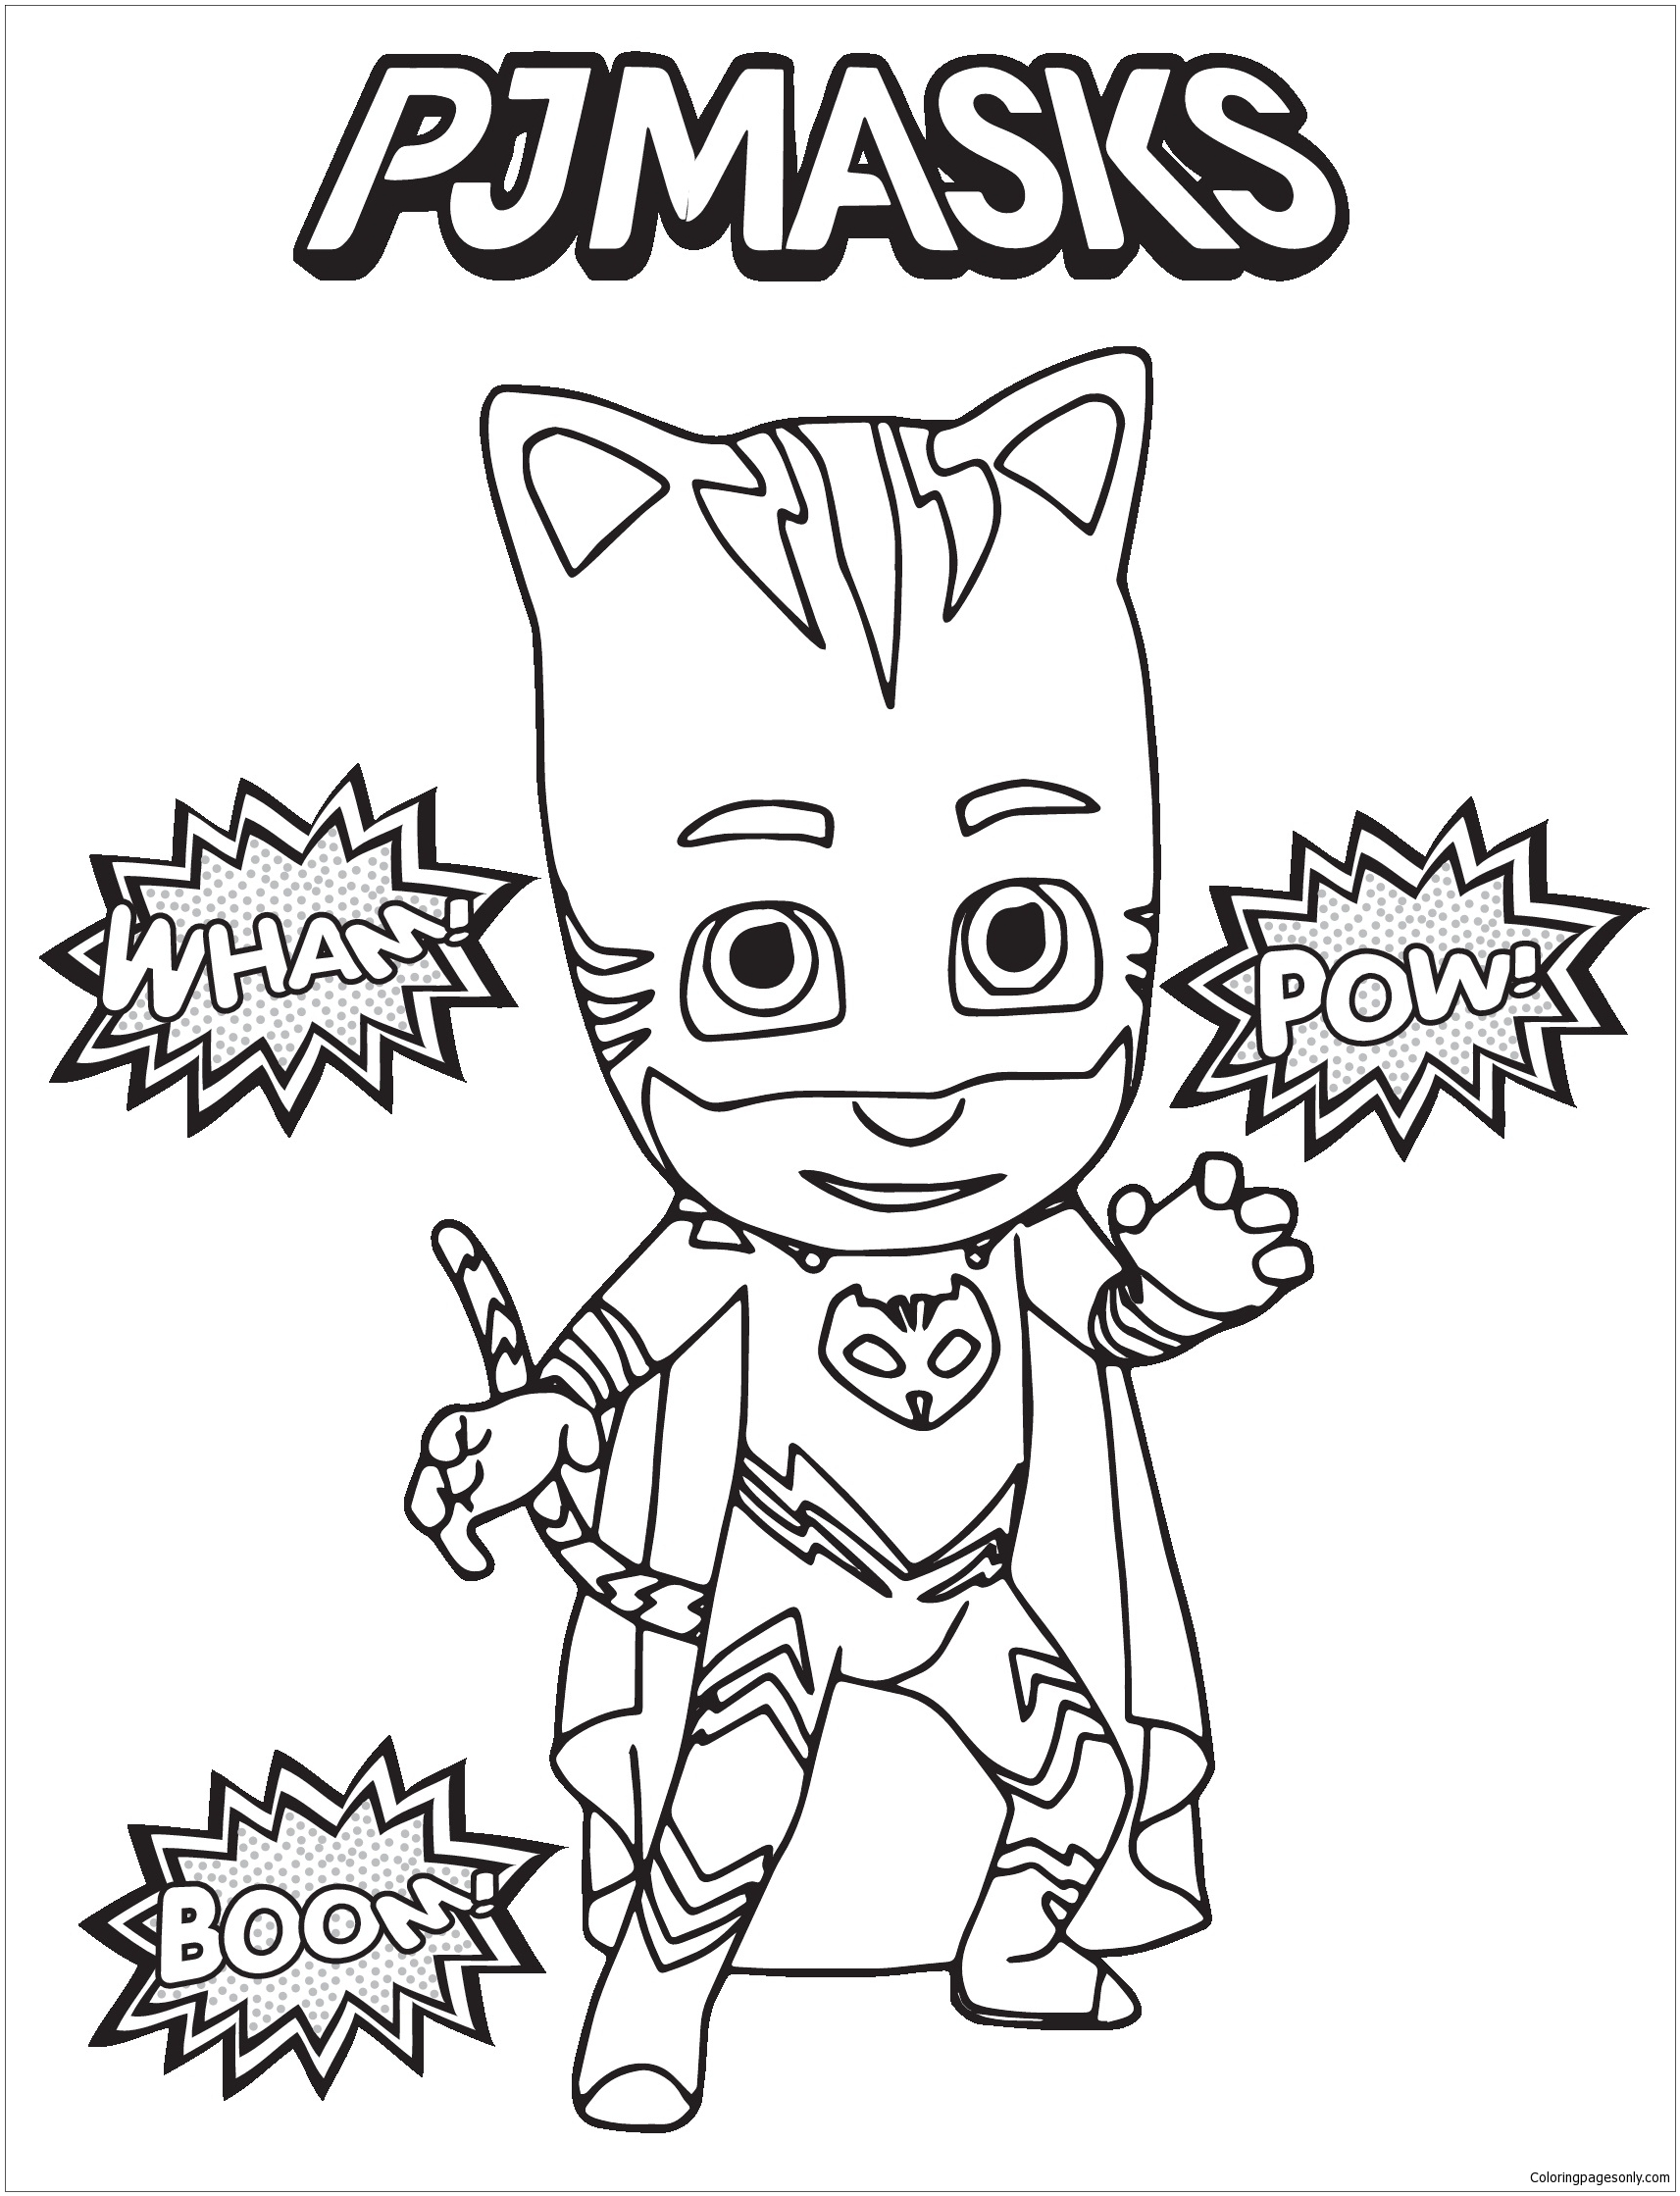 Pj Masks 2 Coloring Page Free Coloring Pages Online